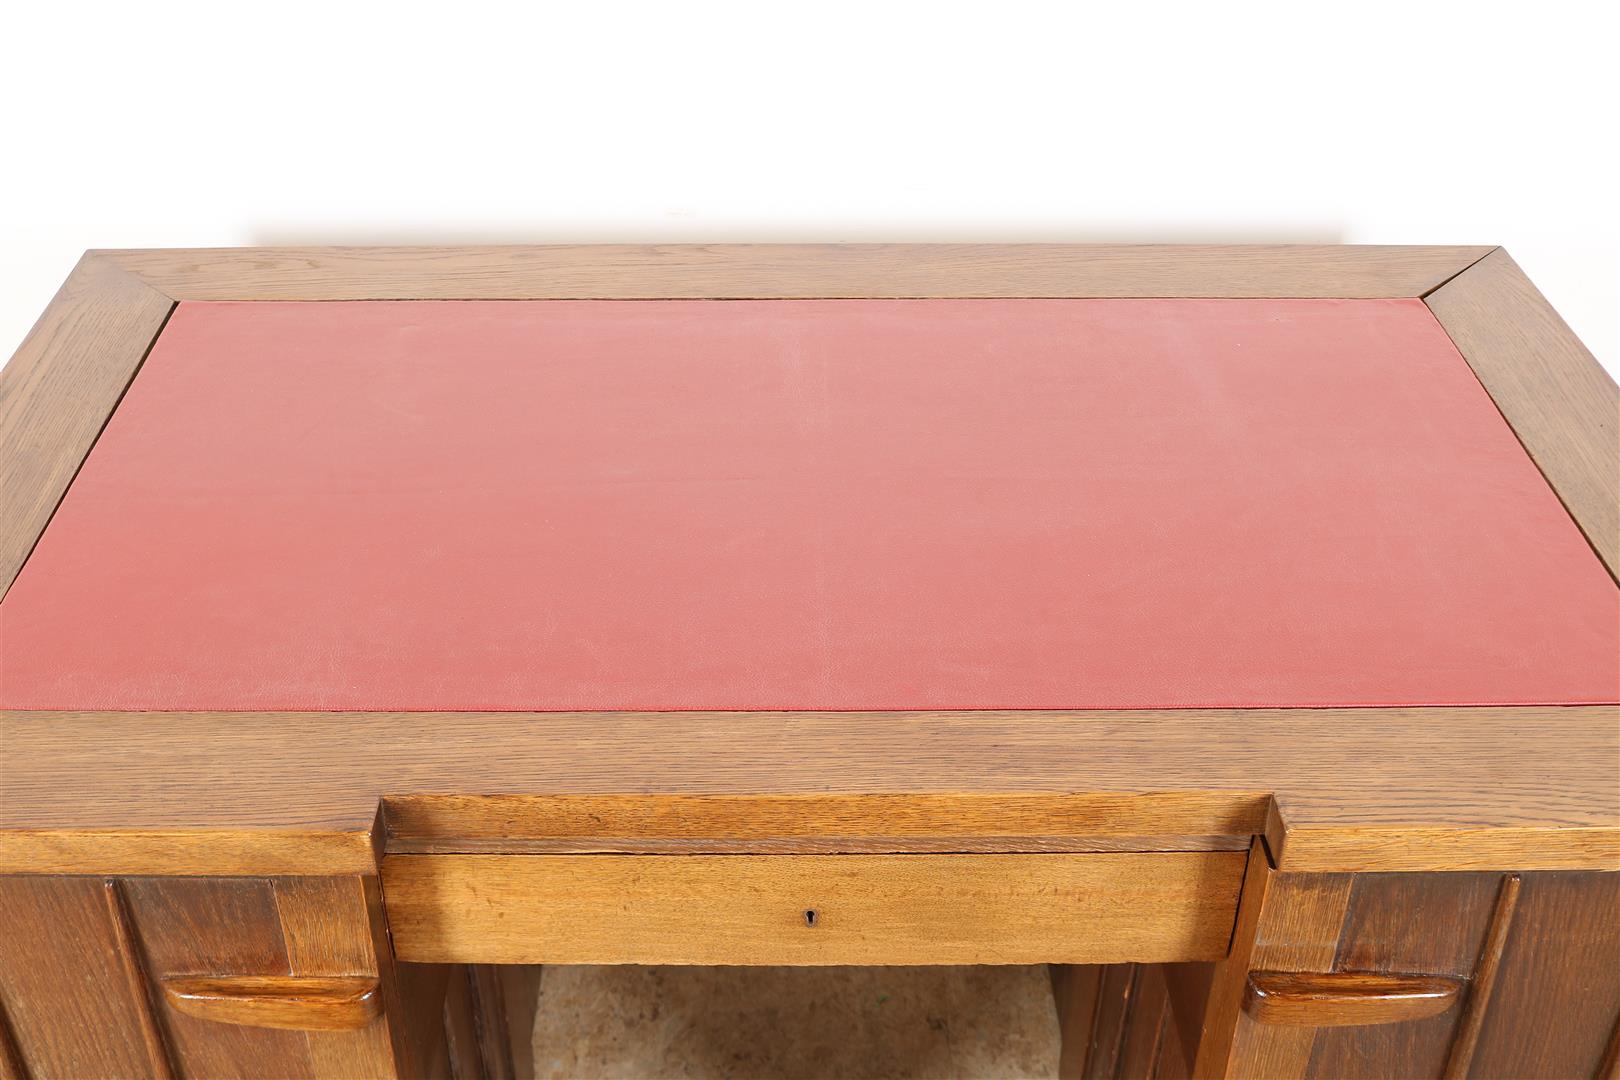 Oak Amsterdam school desk with red leather top, plinth drawer and 2 panel doors and interior with - Image 3 of 5